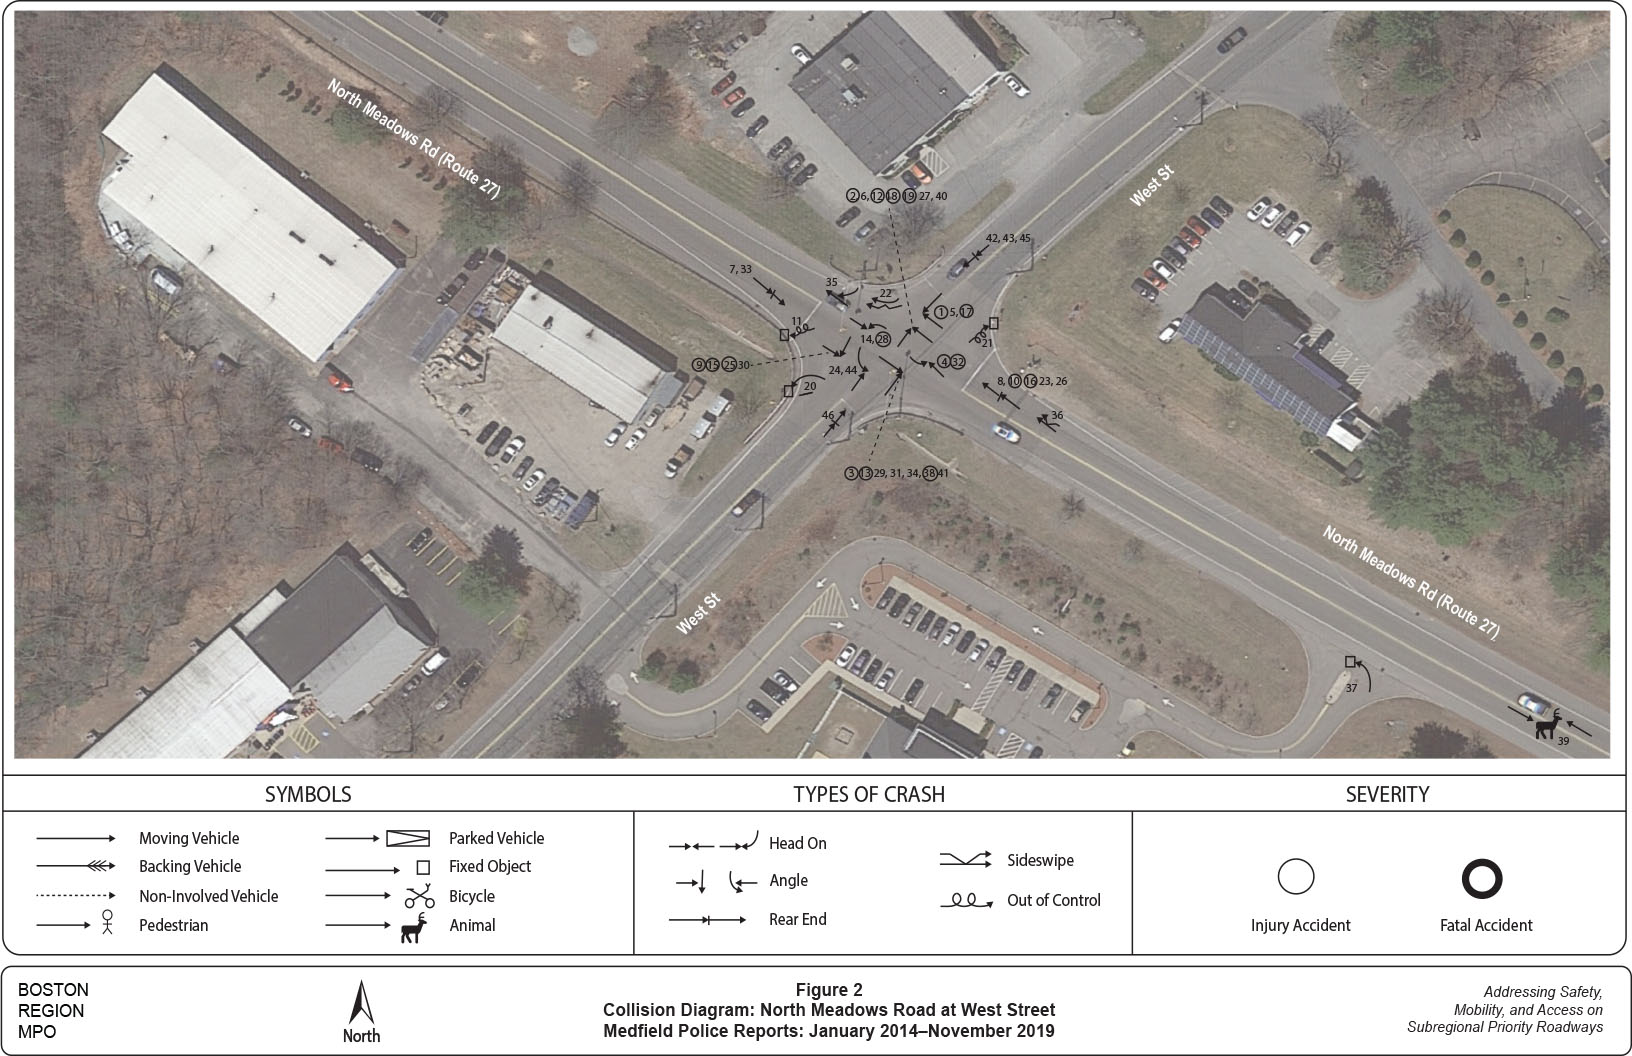 Figure 2: Collision Diagram, January 2014–November 2019
This figure shows the location, collision type, and number observed for all the crashes reported to the Medfield police department at the intersection.
